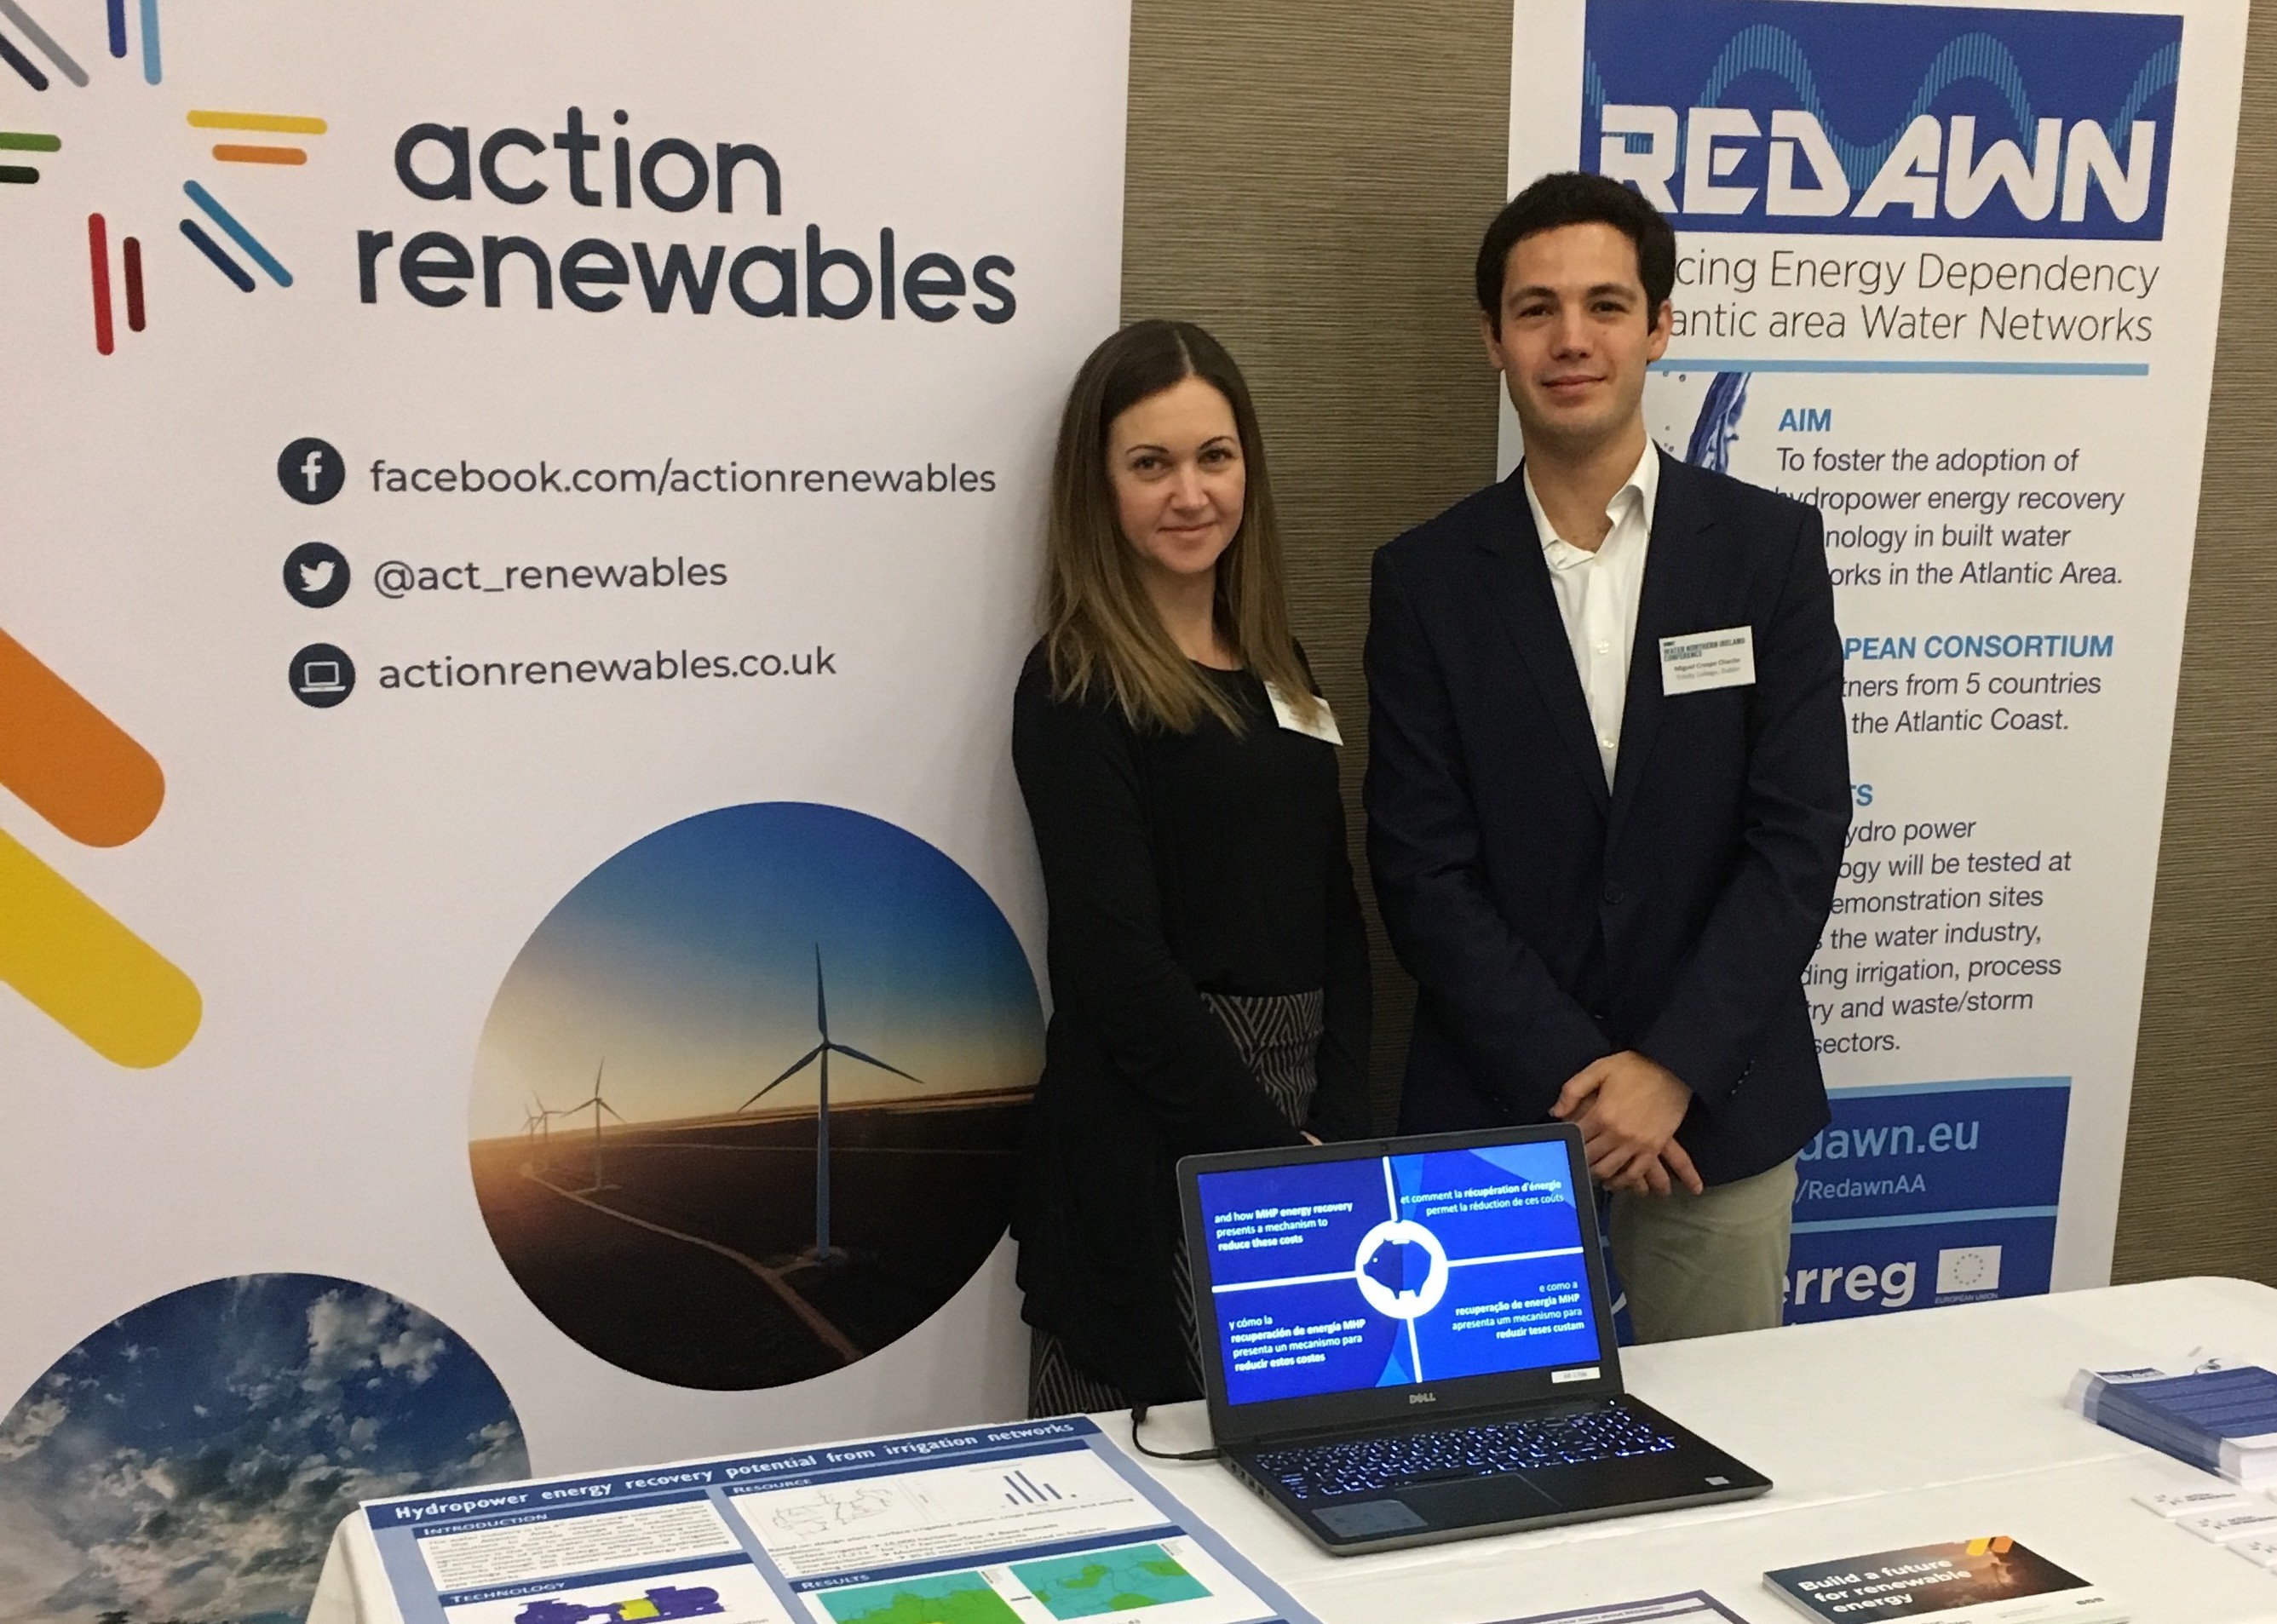 REDAWN's stand at NI Water Event